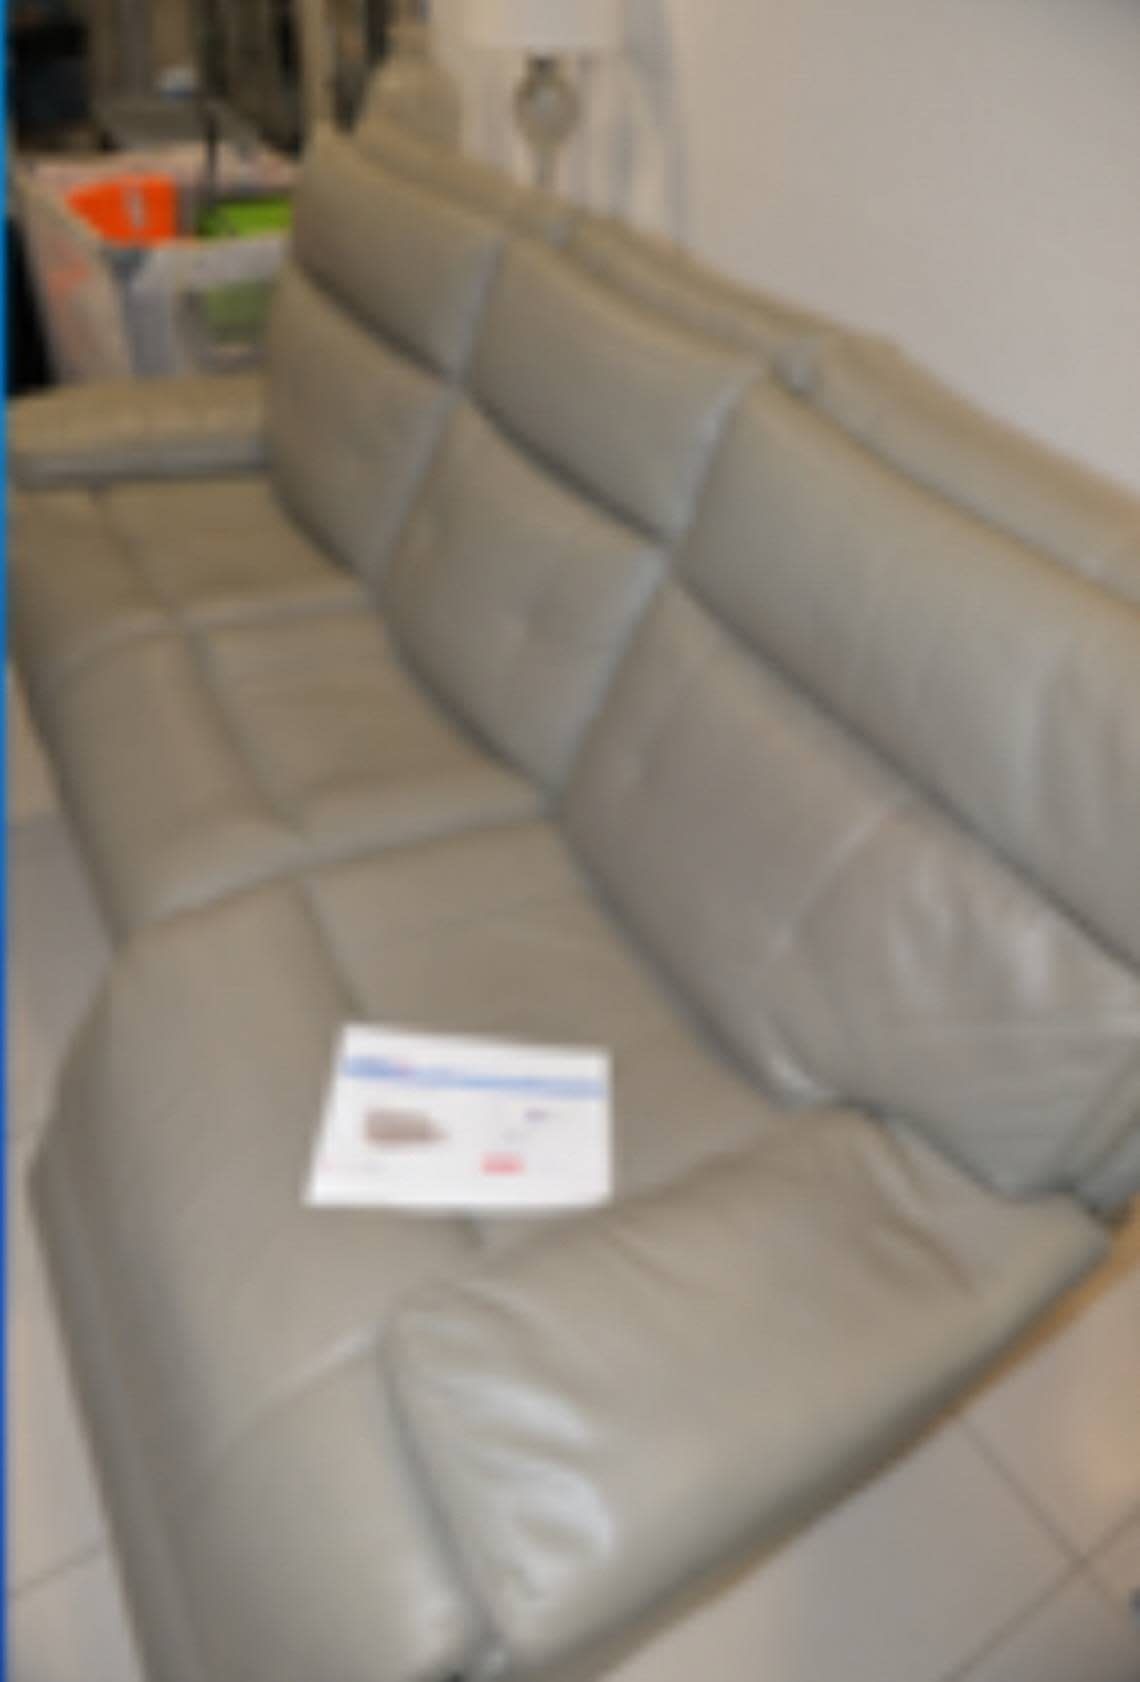 The Miami-Dade County State Attorney’s Office says former School Board member Lubby Navarro bought items like this couch with her school district-issued credit card.